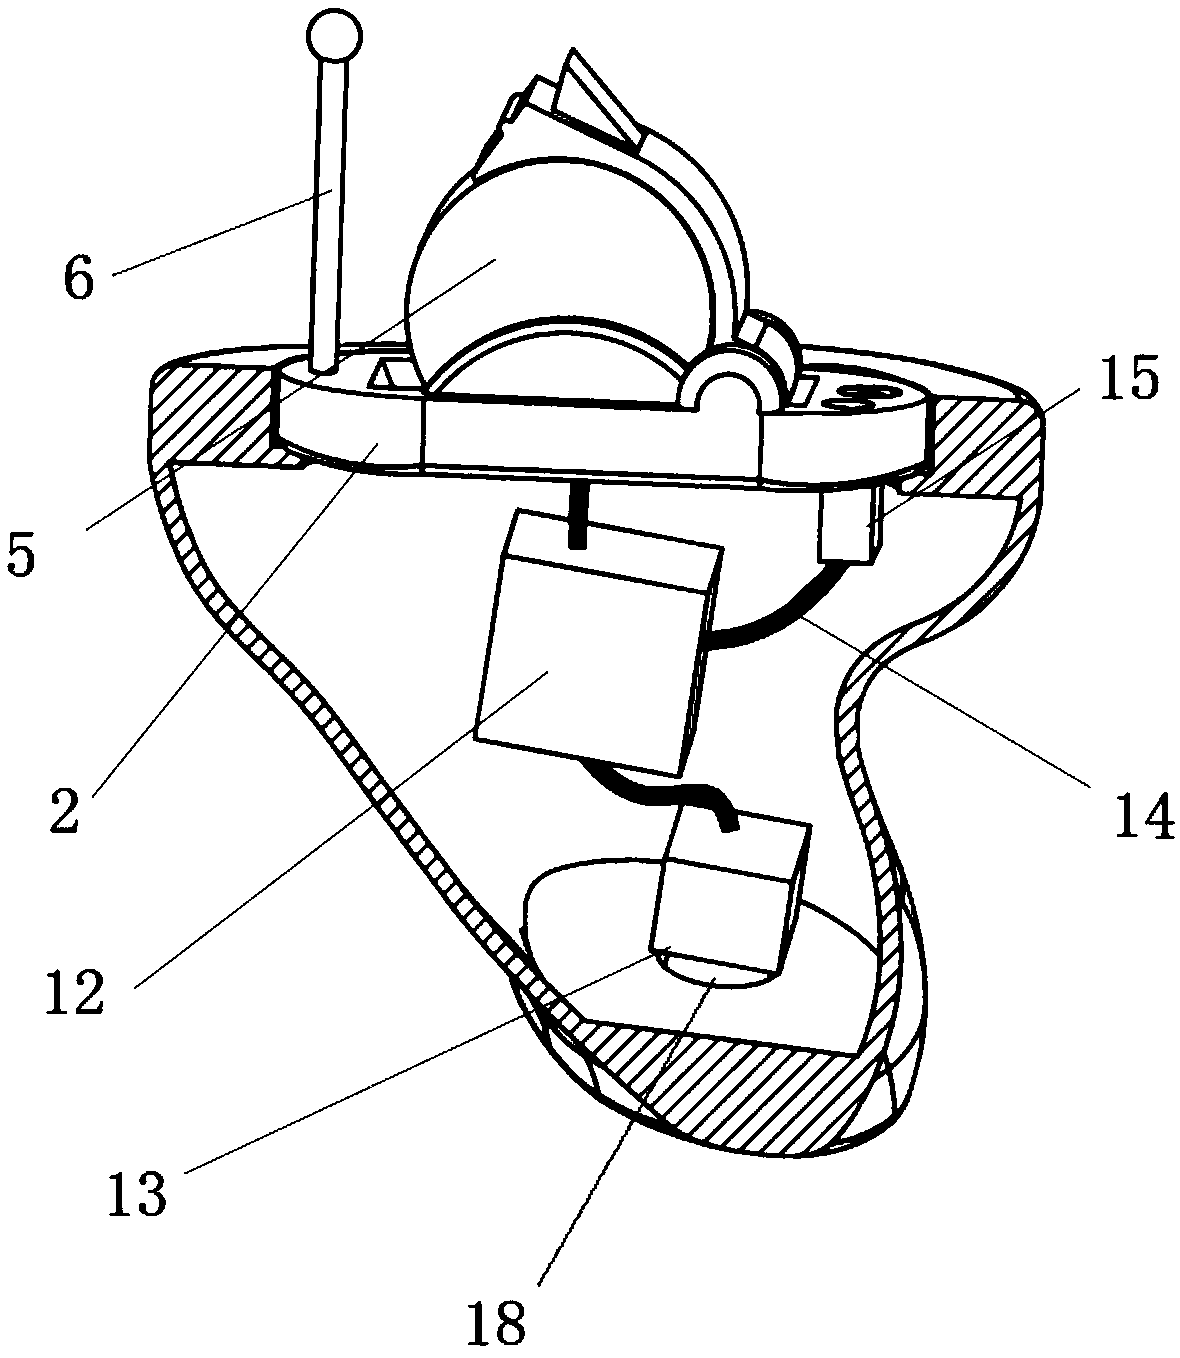 Manufacturing method of 3D-printed hearing aid casing